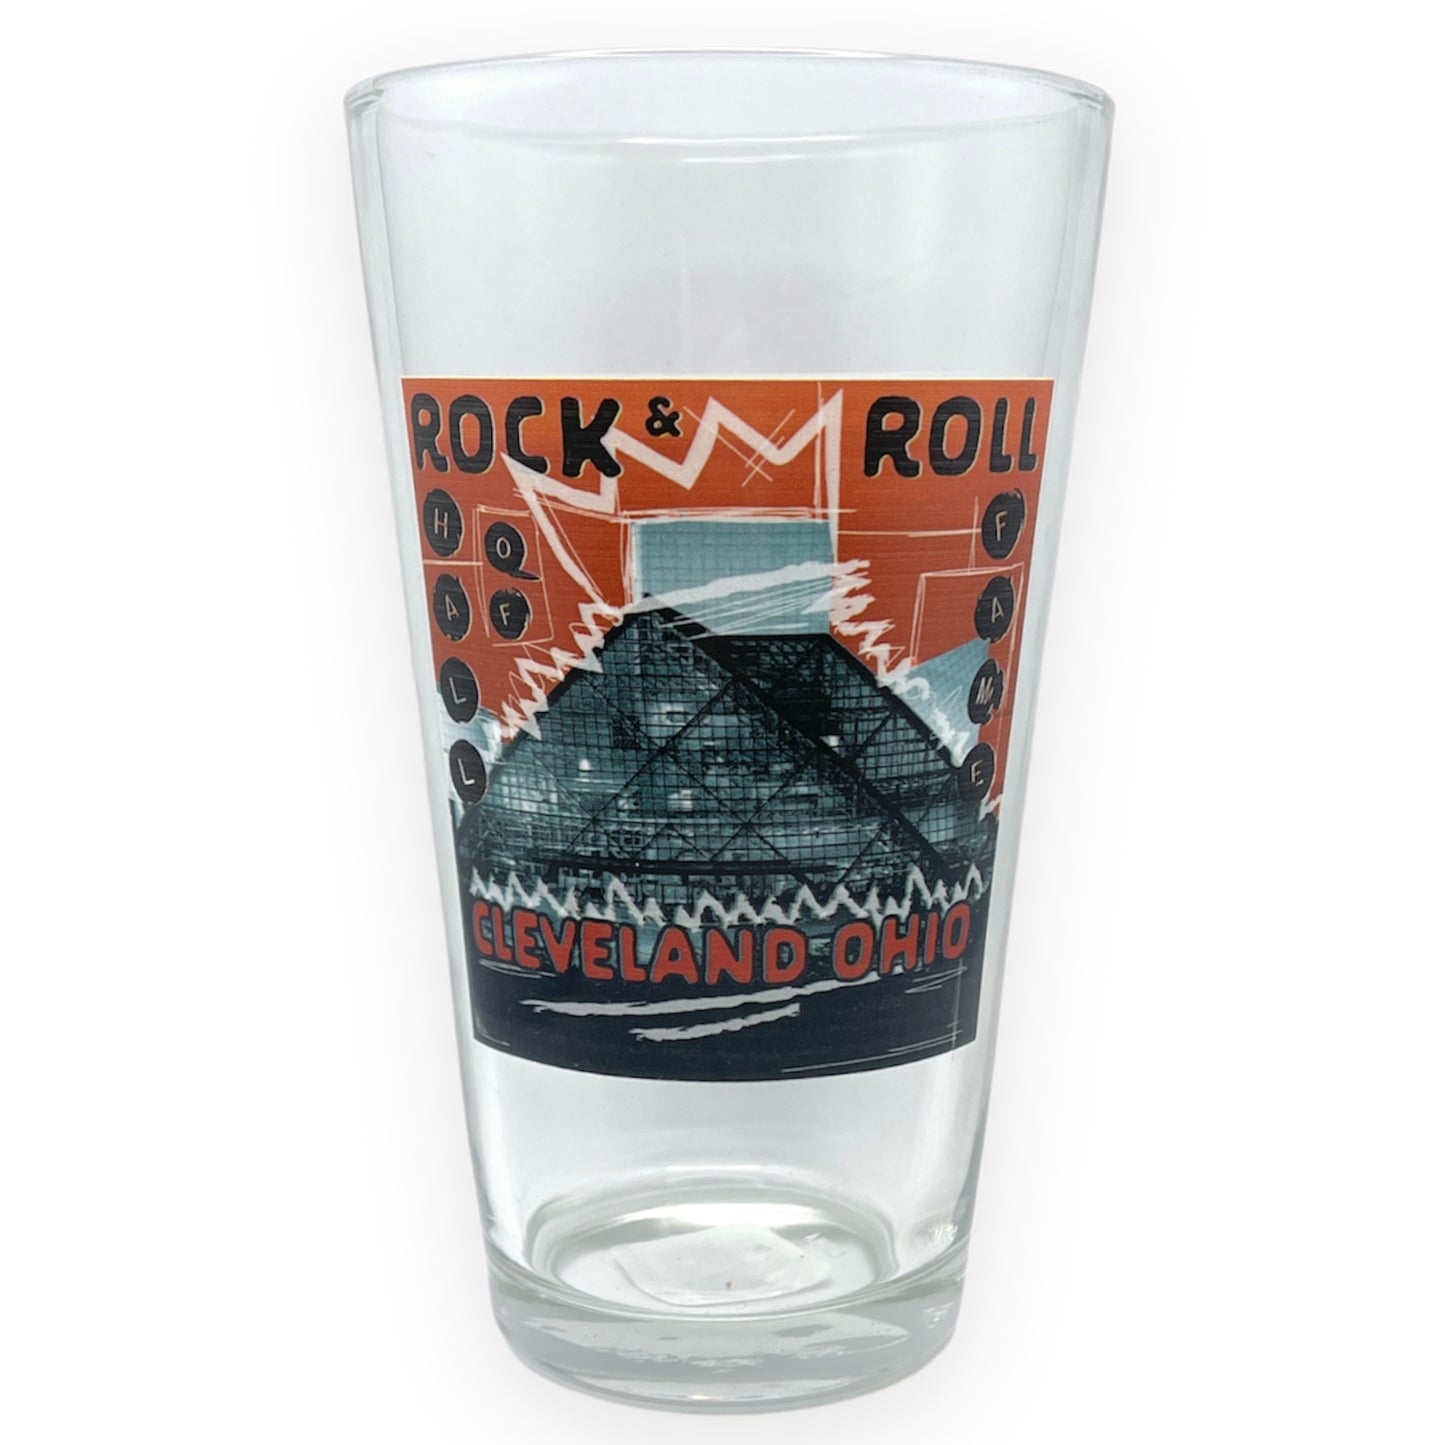 ROCK HALL CROWN OF CLEVELAND PINT GLASS